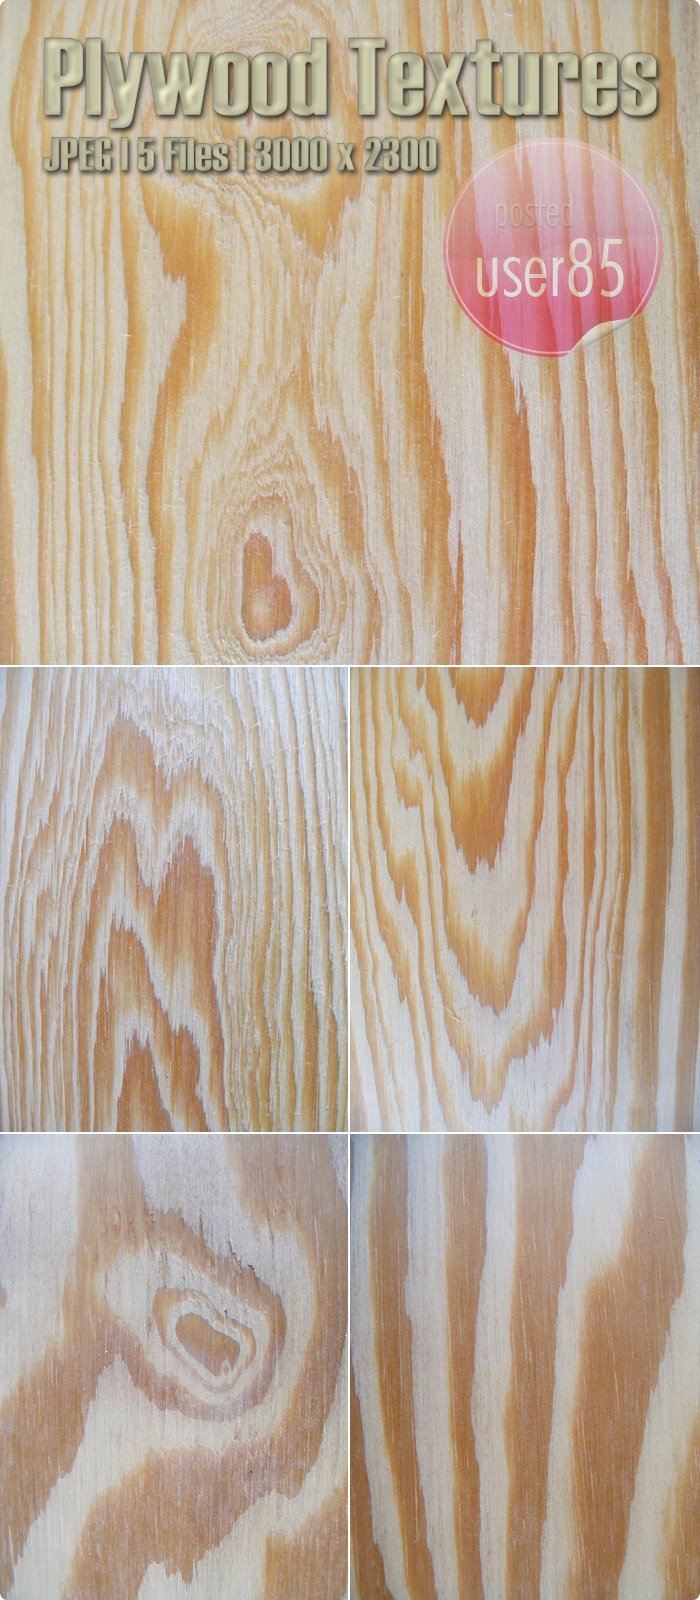 Plywood Textures 7ad7f610